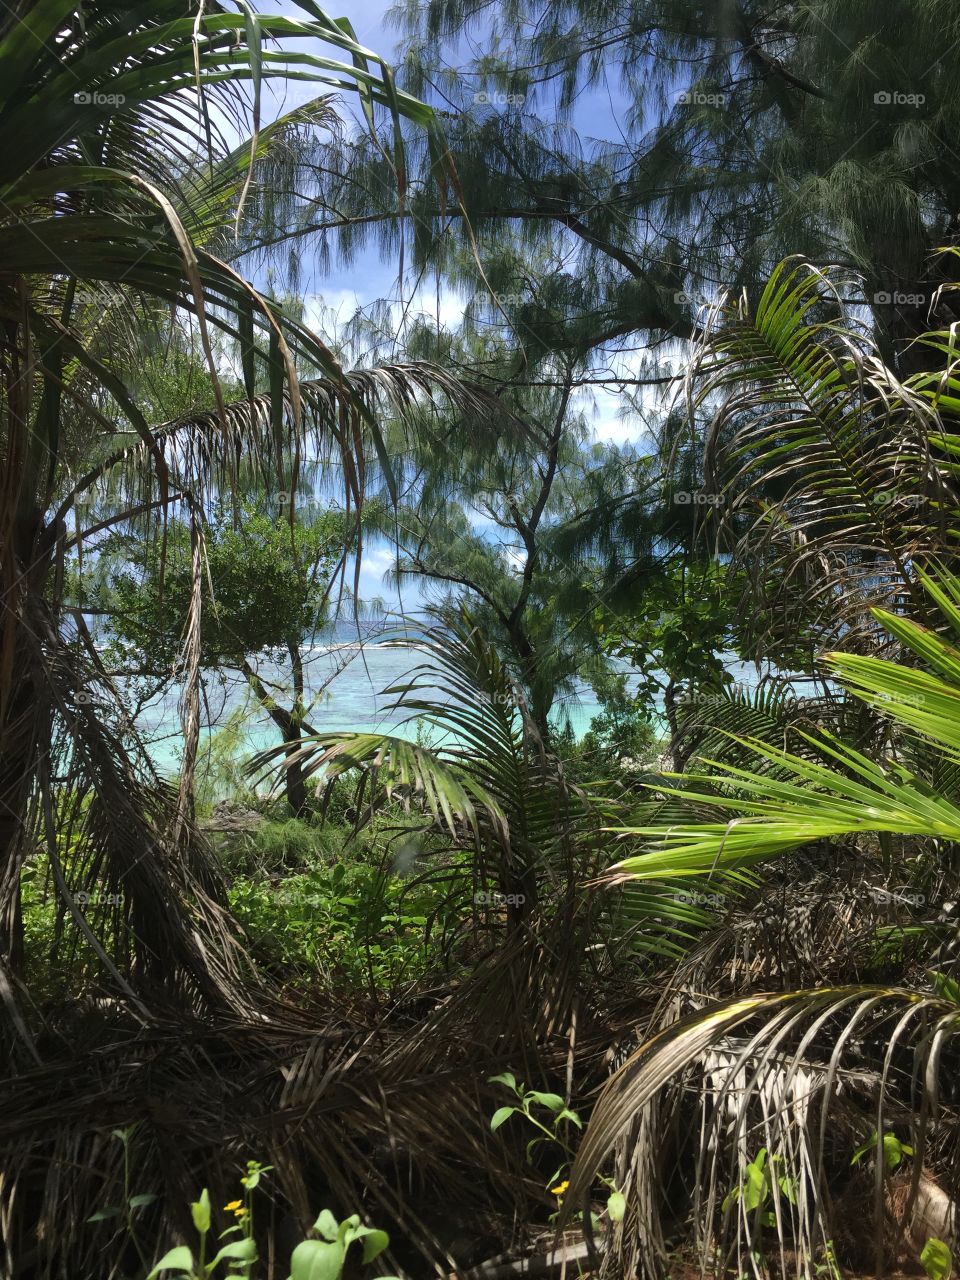 Looking through the trees in the jungle of Ritidian nature preserve on Guam, to see the ocean beyond.